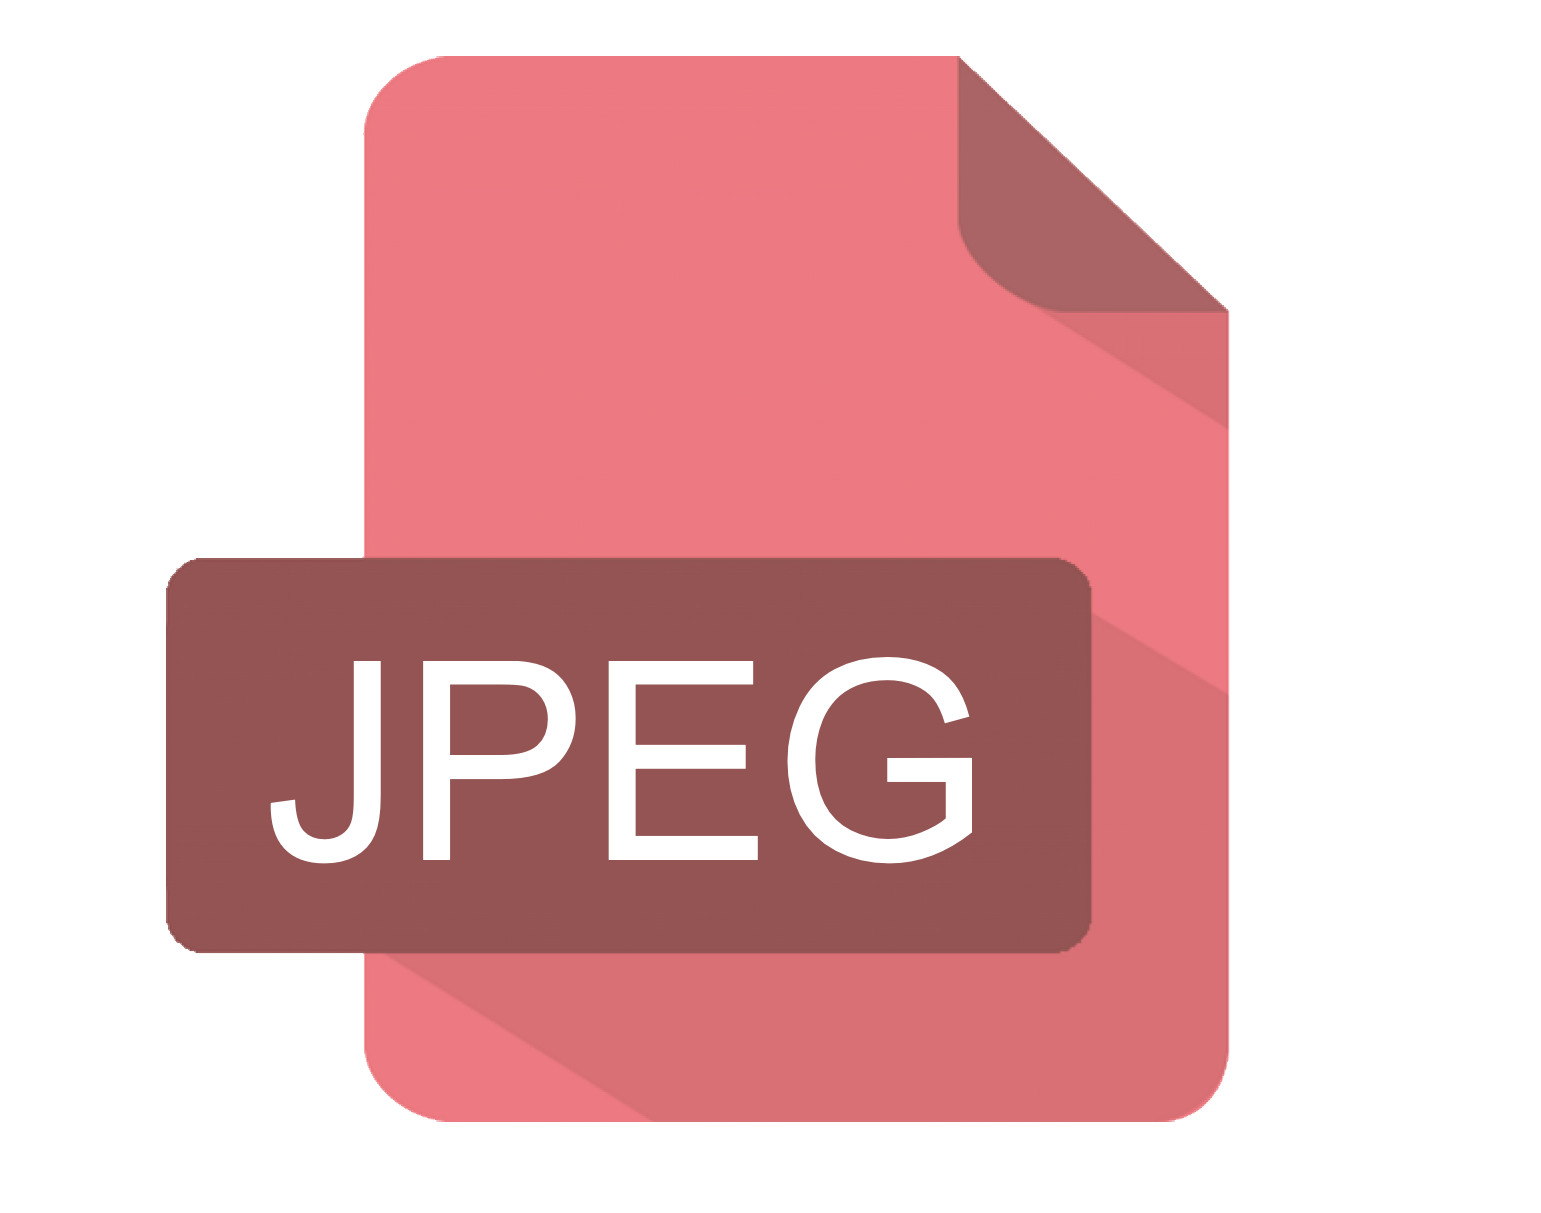 How to extract JPG data from PDF